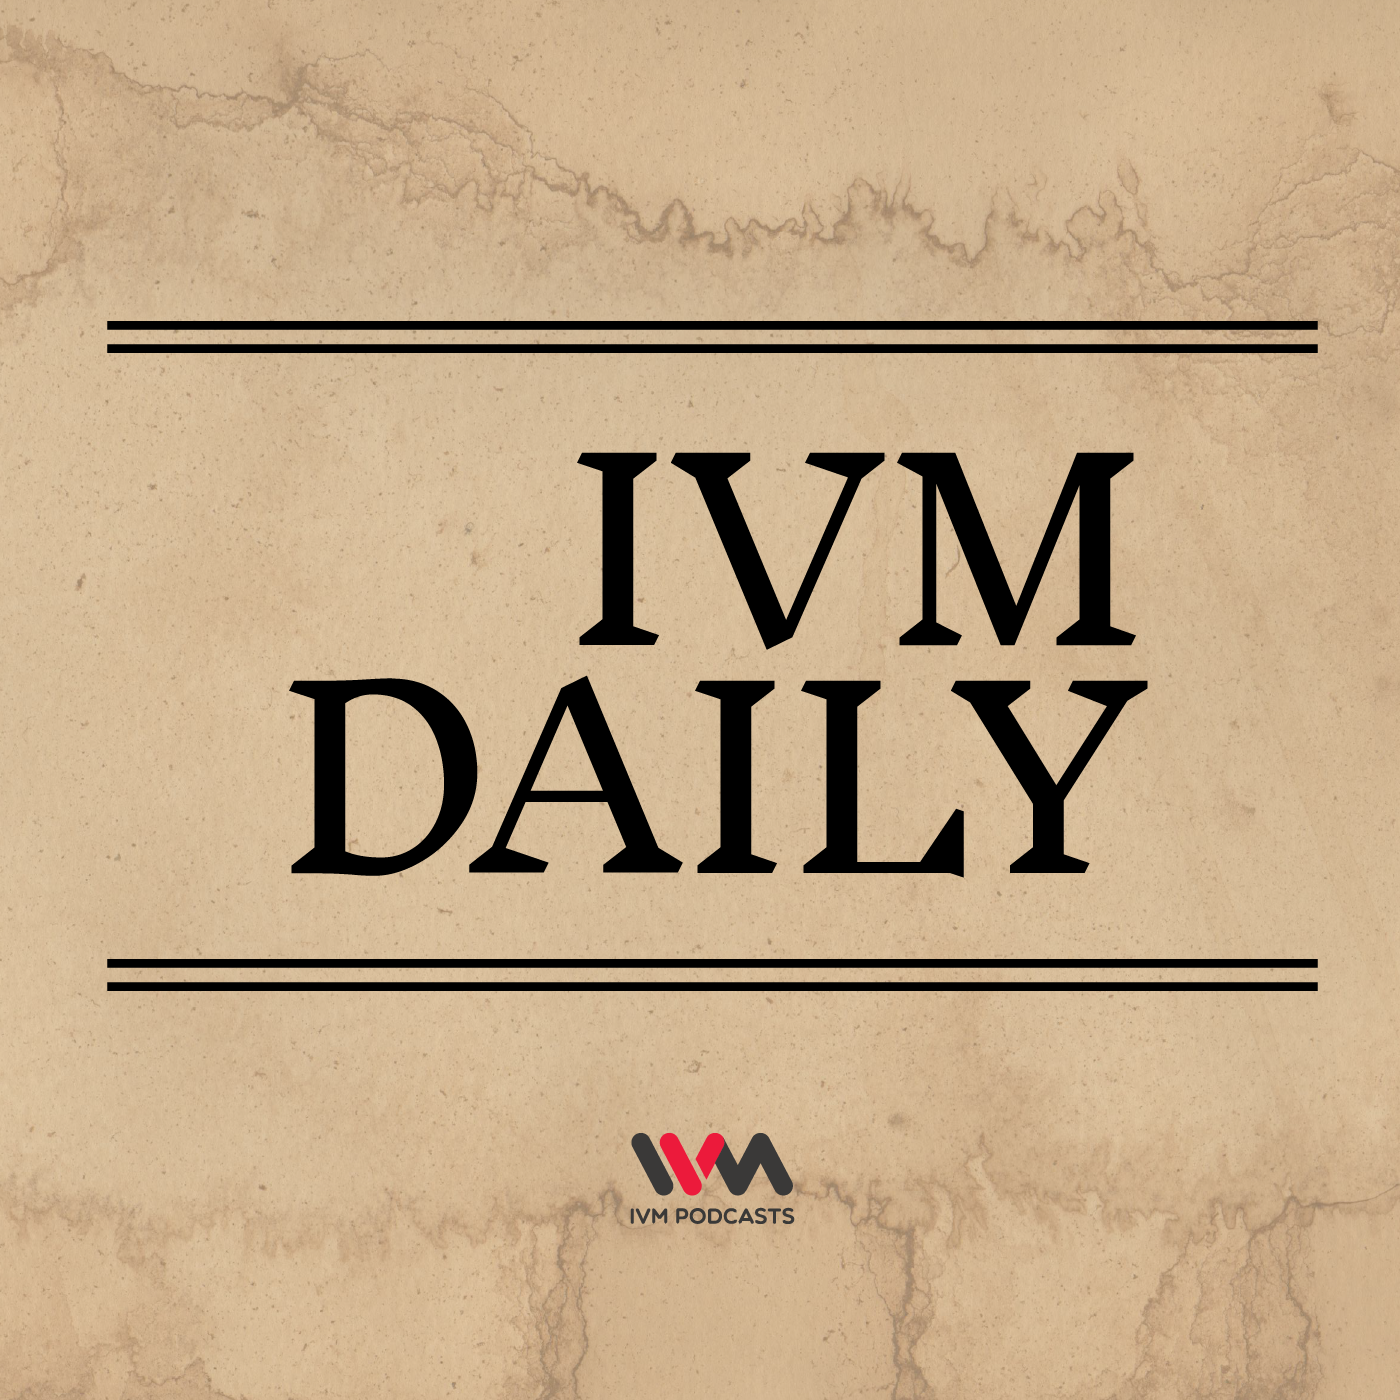 IVM Daily:IVM Podcasts